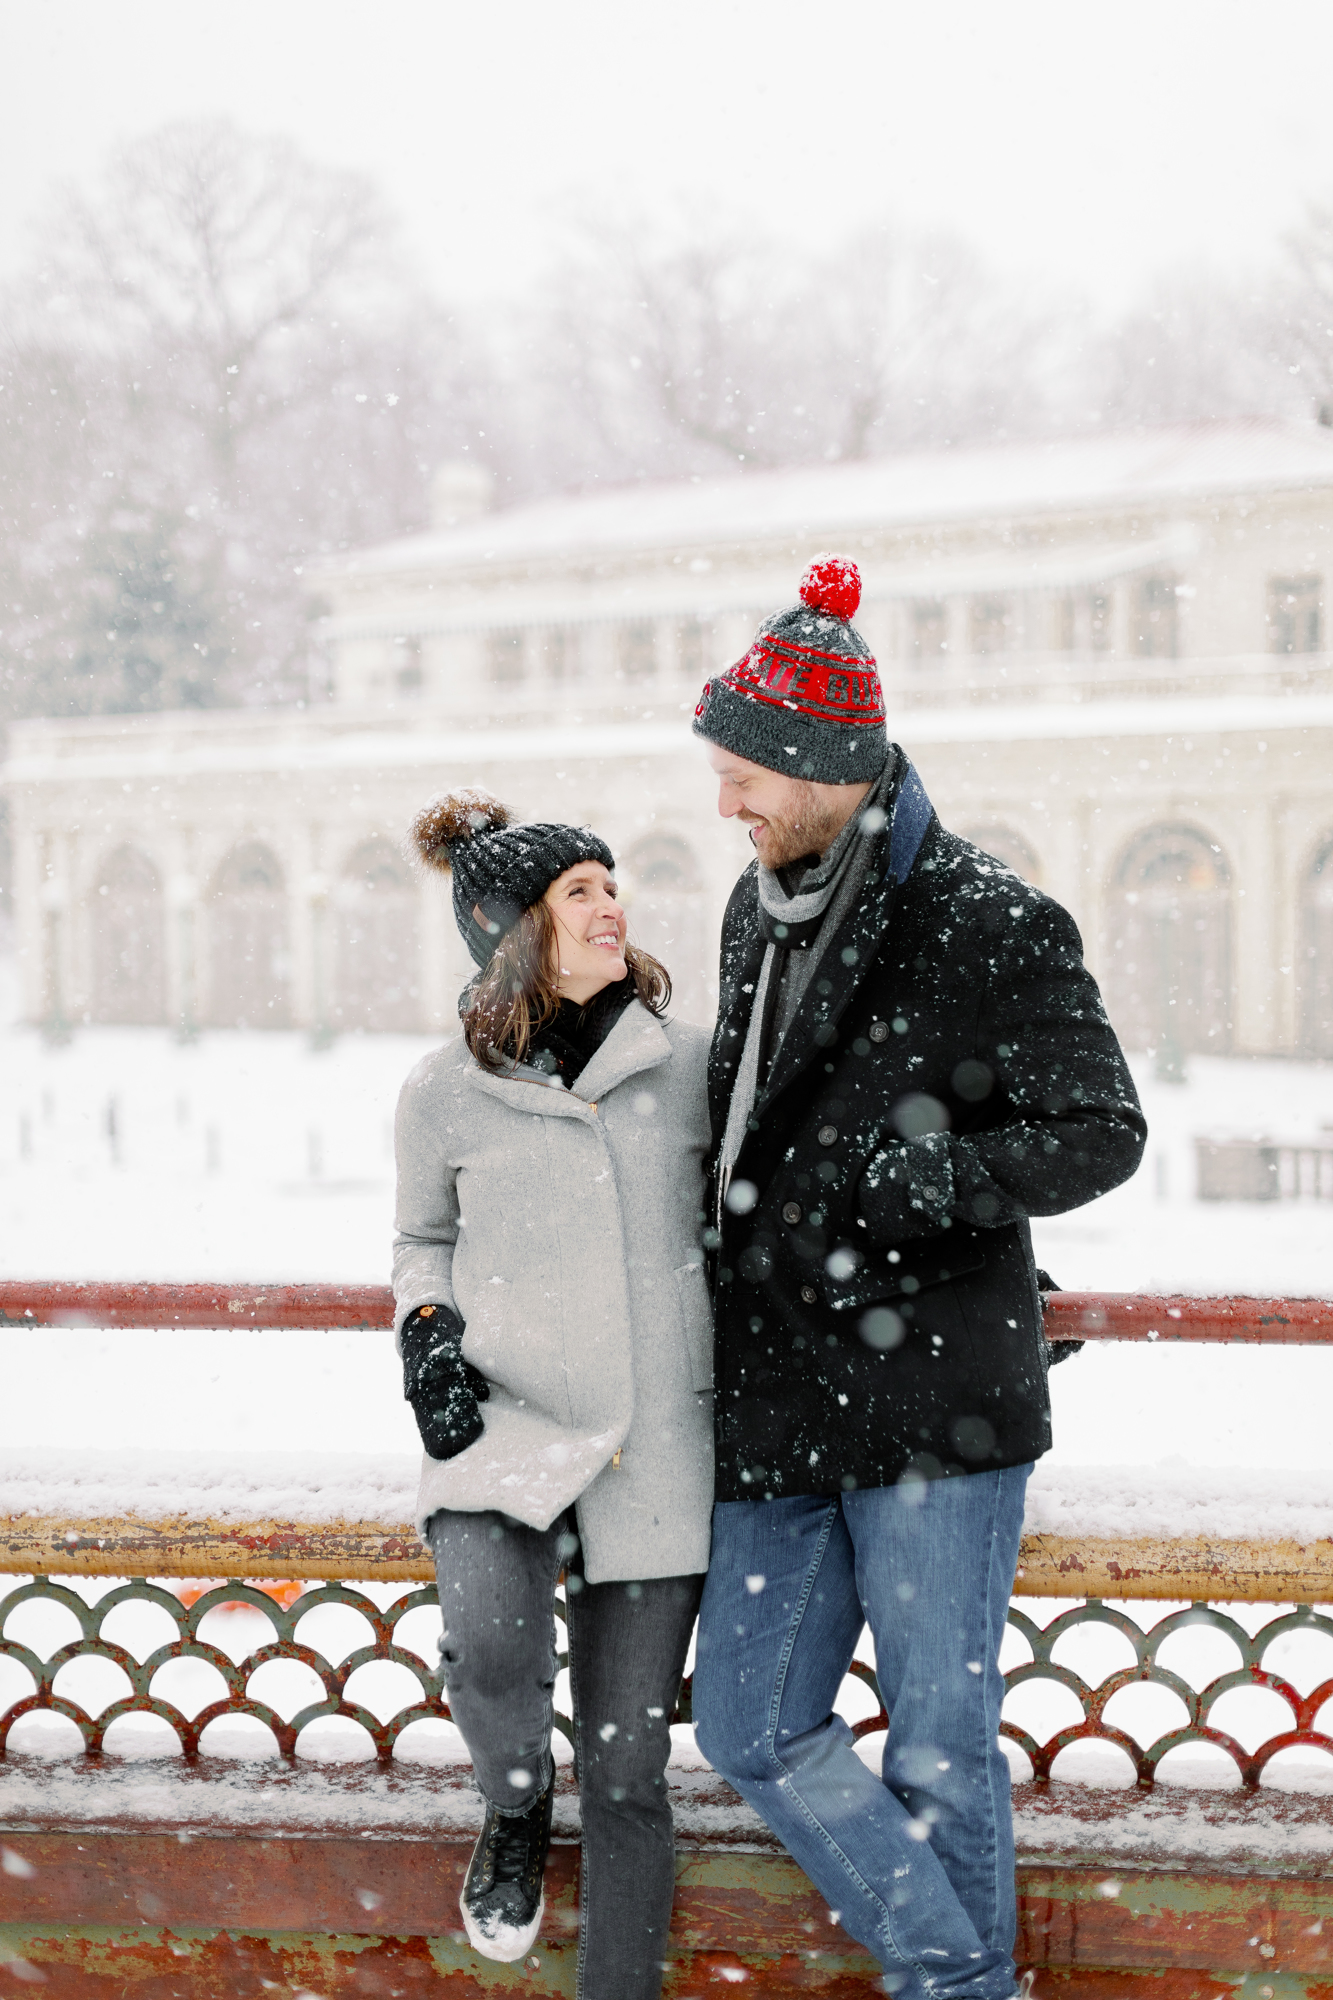 Idyllic and Snowy Engagement Photos in Prospect Park